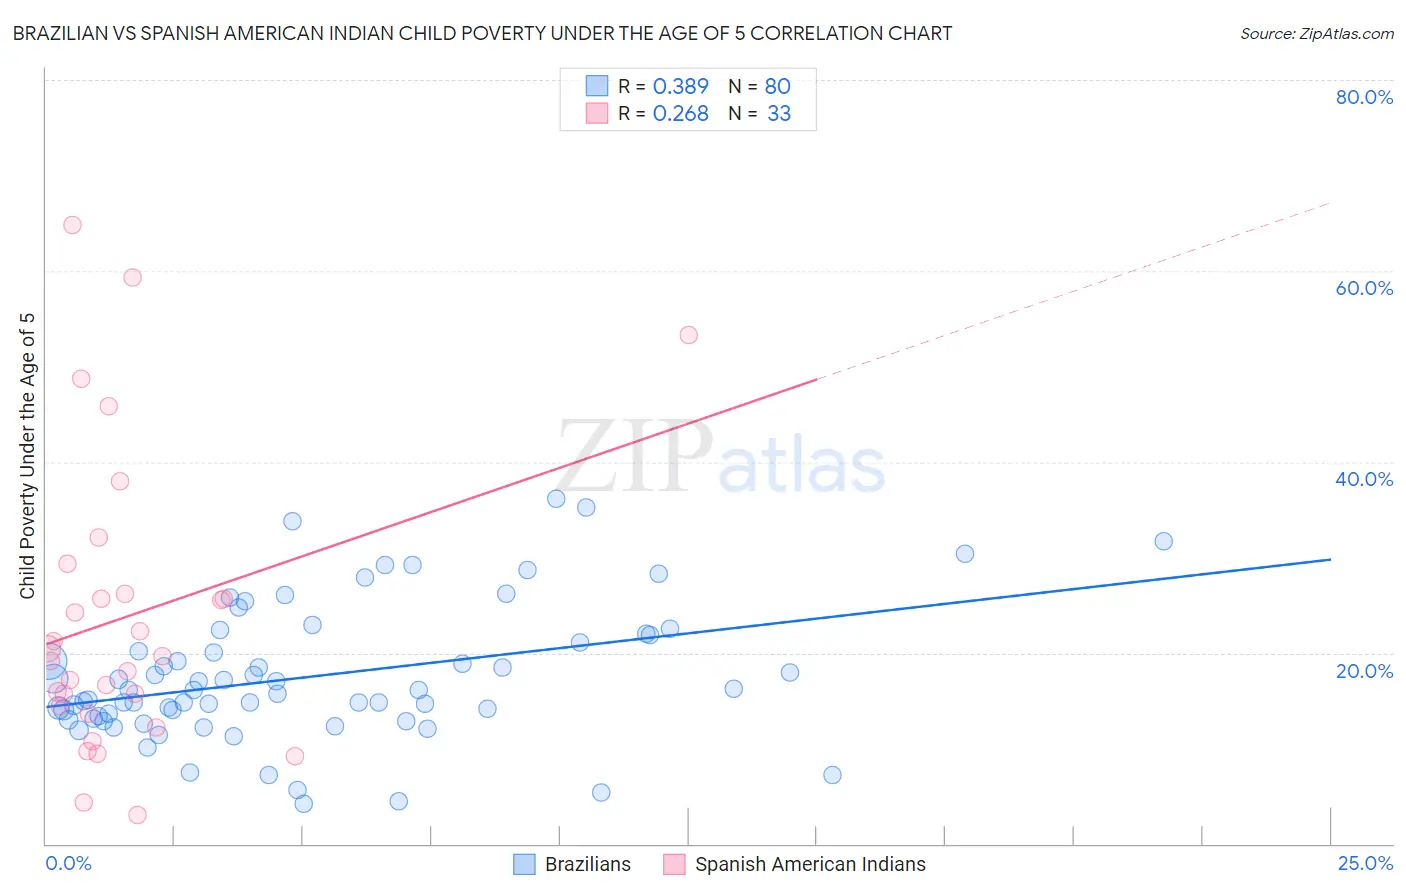 Brazilian vs Spanish American Indian Child Poverty Under the Age of 5